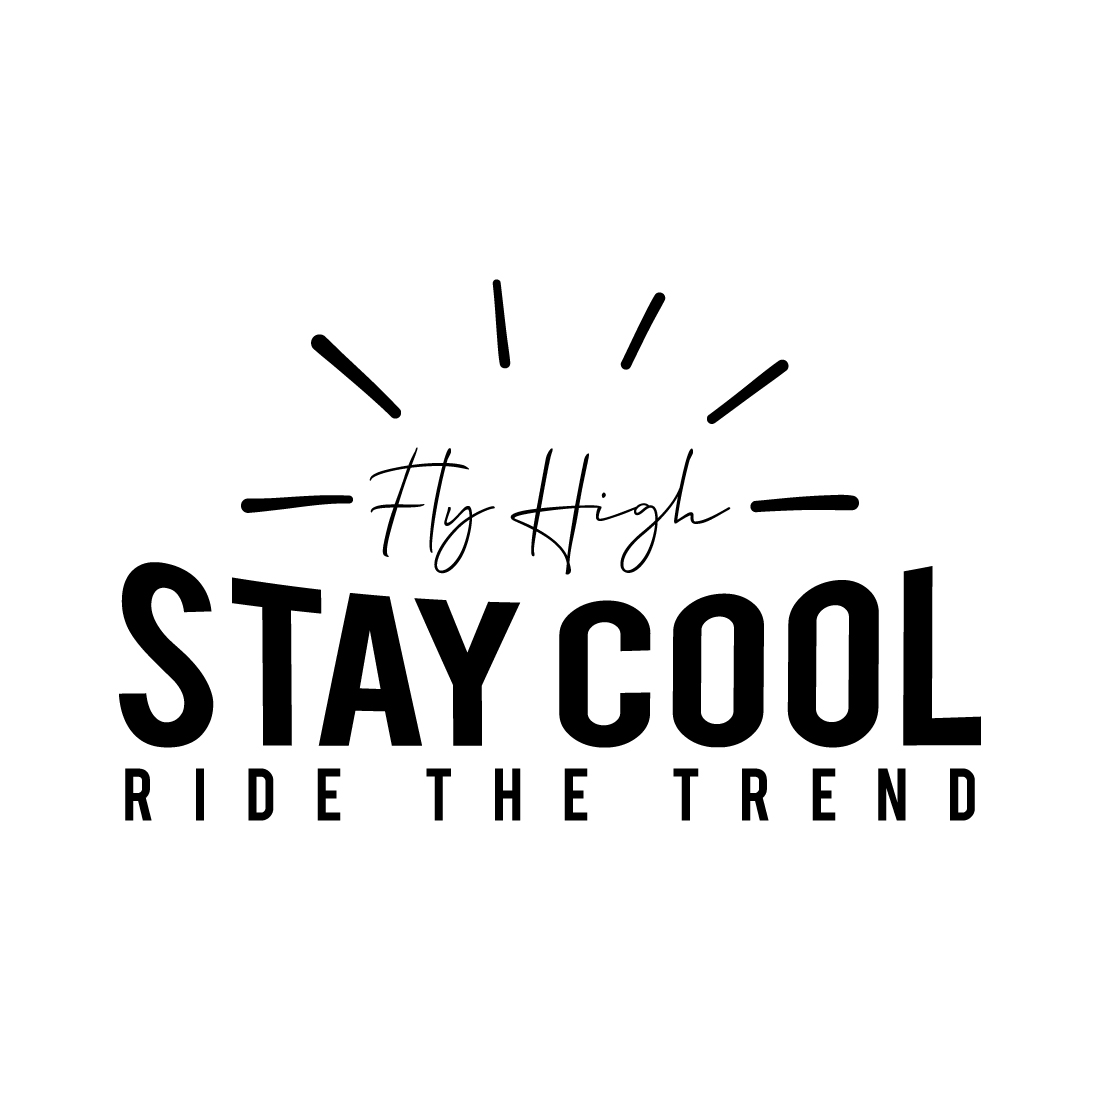 fly high stay cool ride the trend tshirt design preview image.